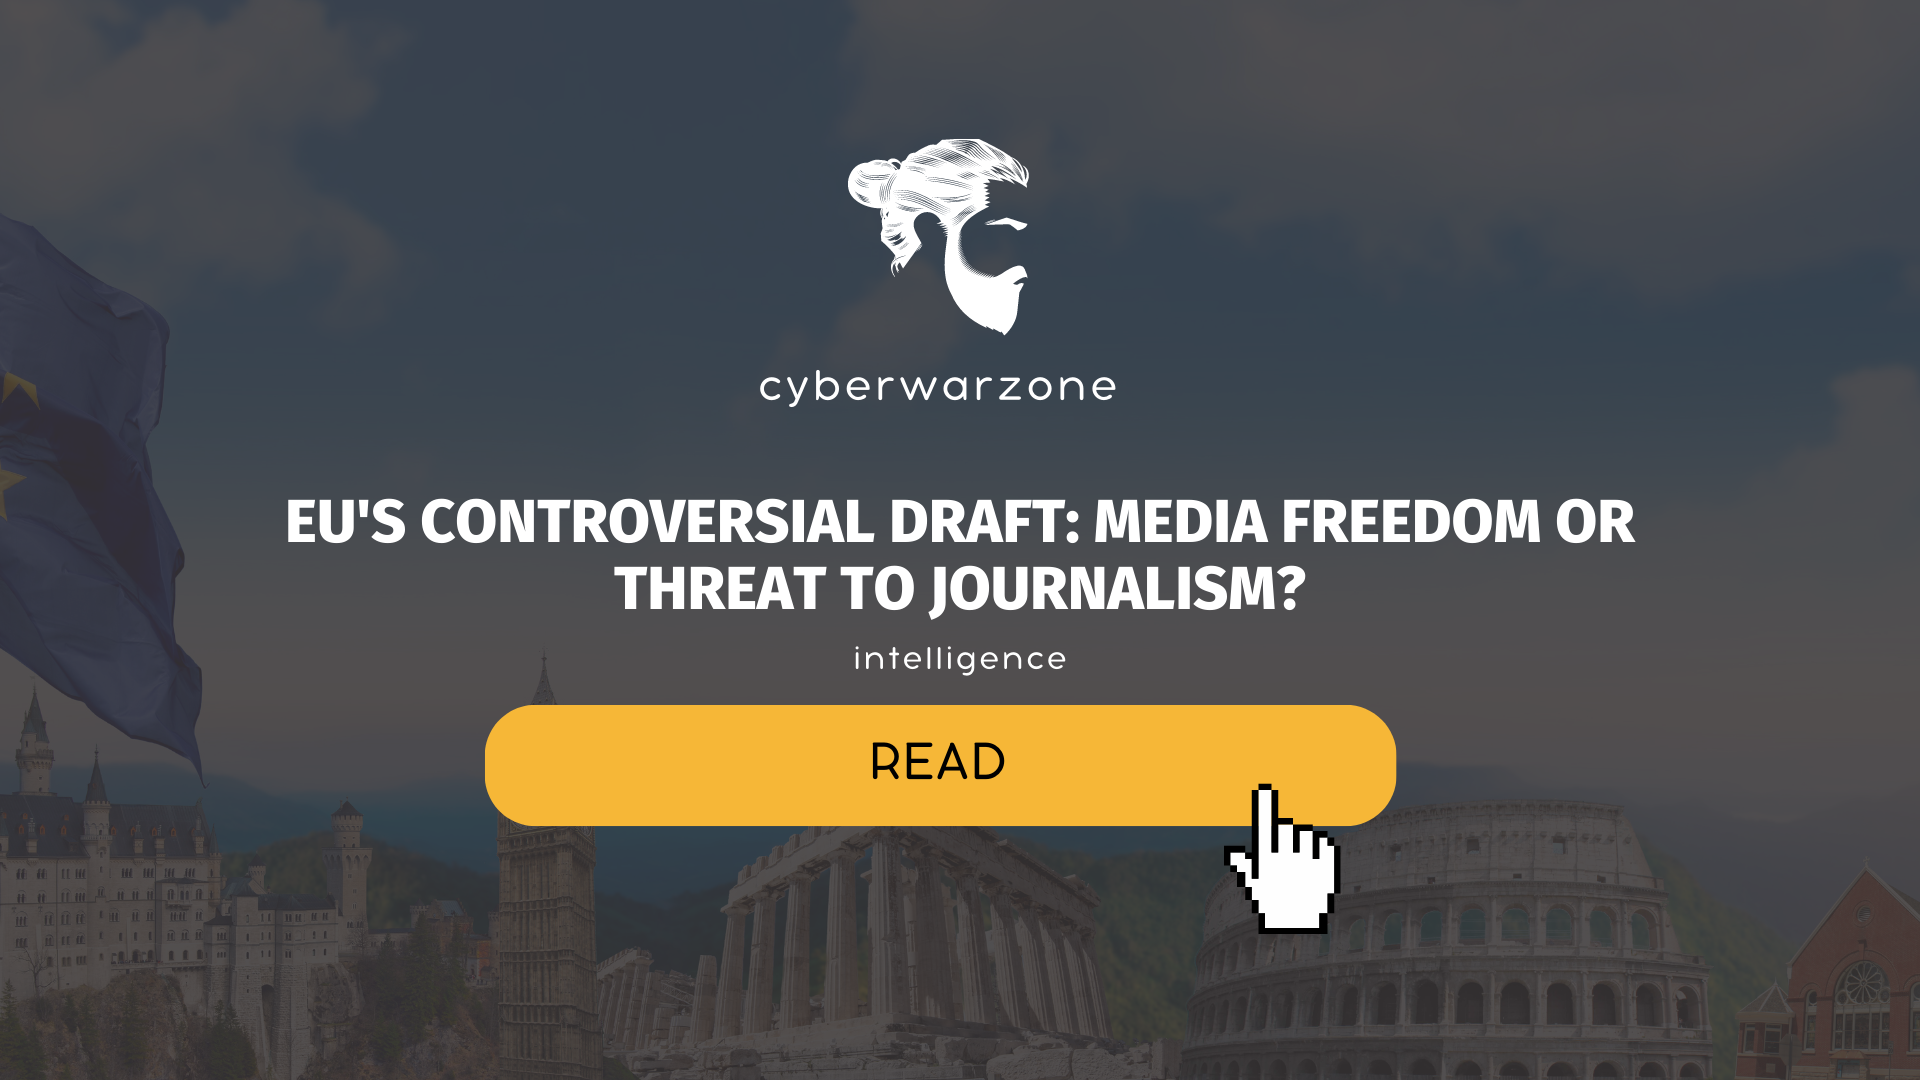 EU's Controversial Draft: Media Freedom or Threat to Journalism?